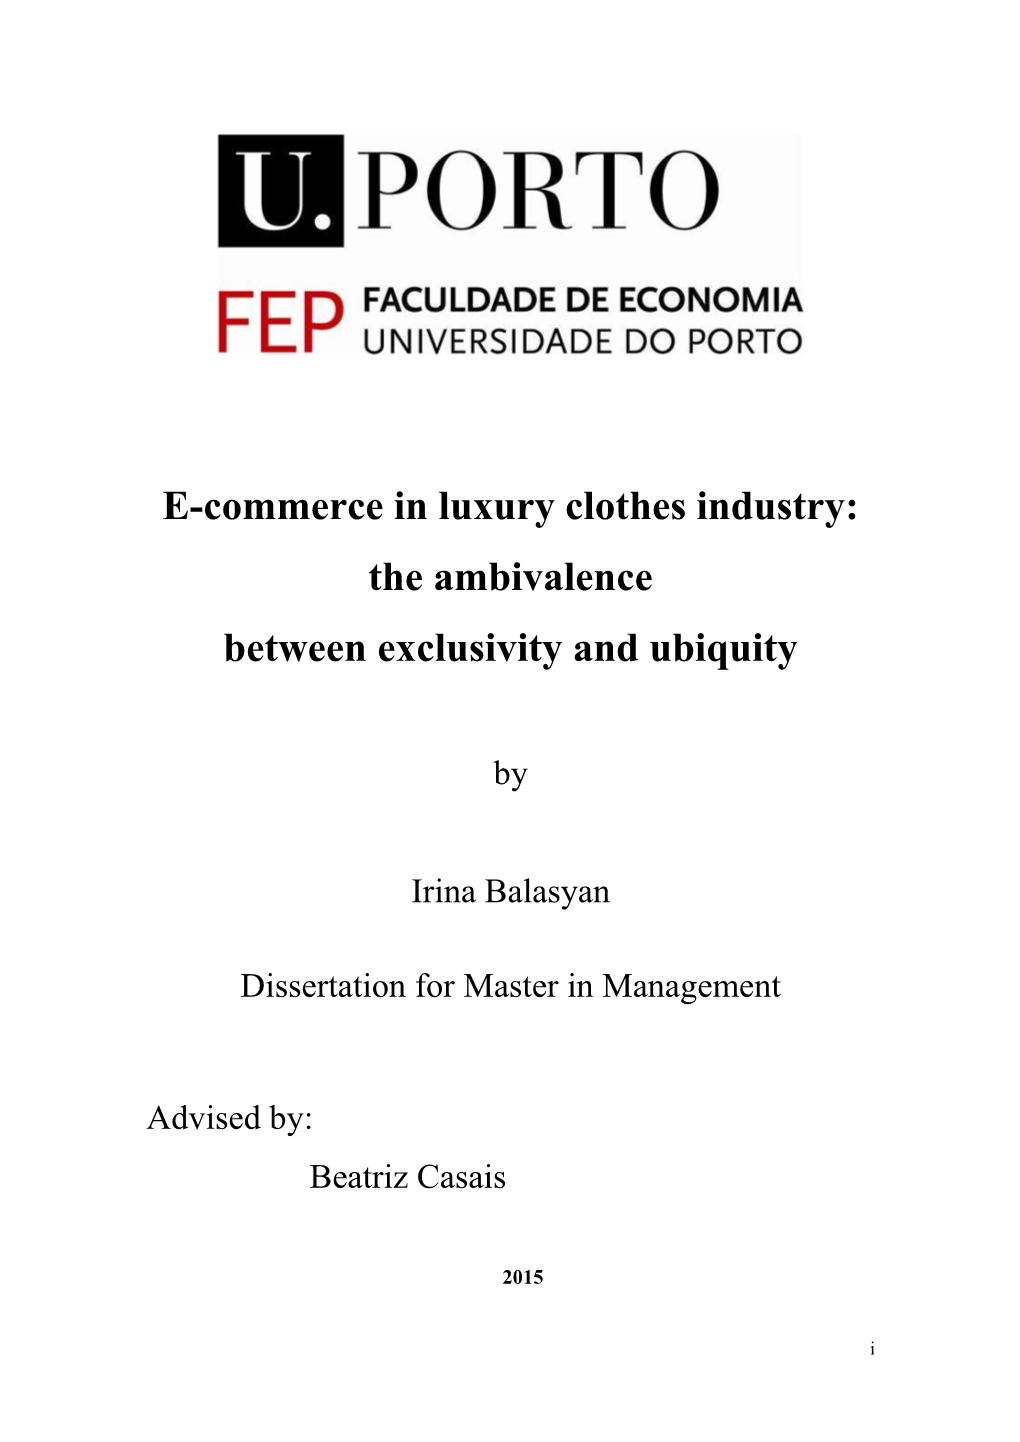 E-Commerce in Luxury Clothes Industry: the Ambivalence Between Exclusivity and Ubiquity